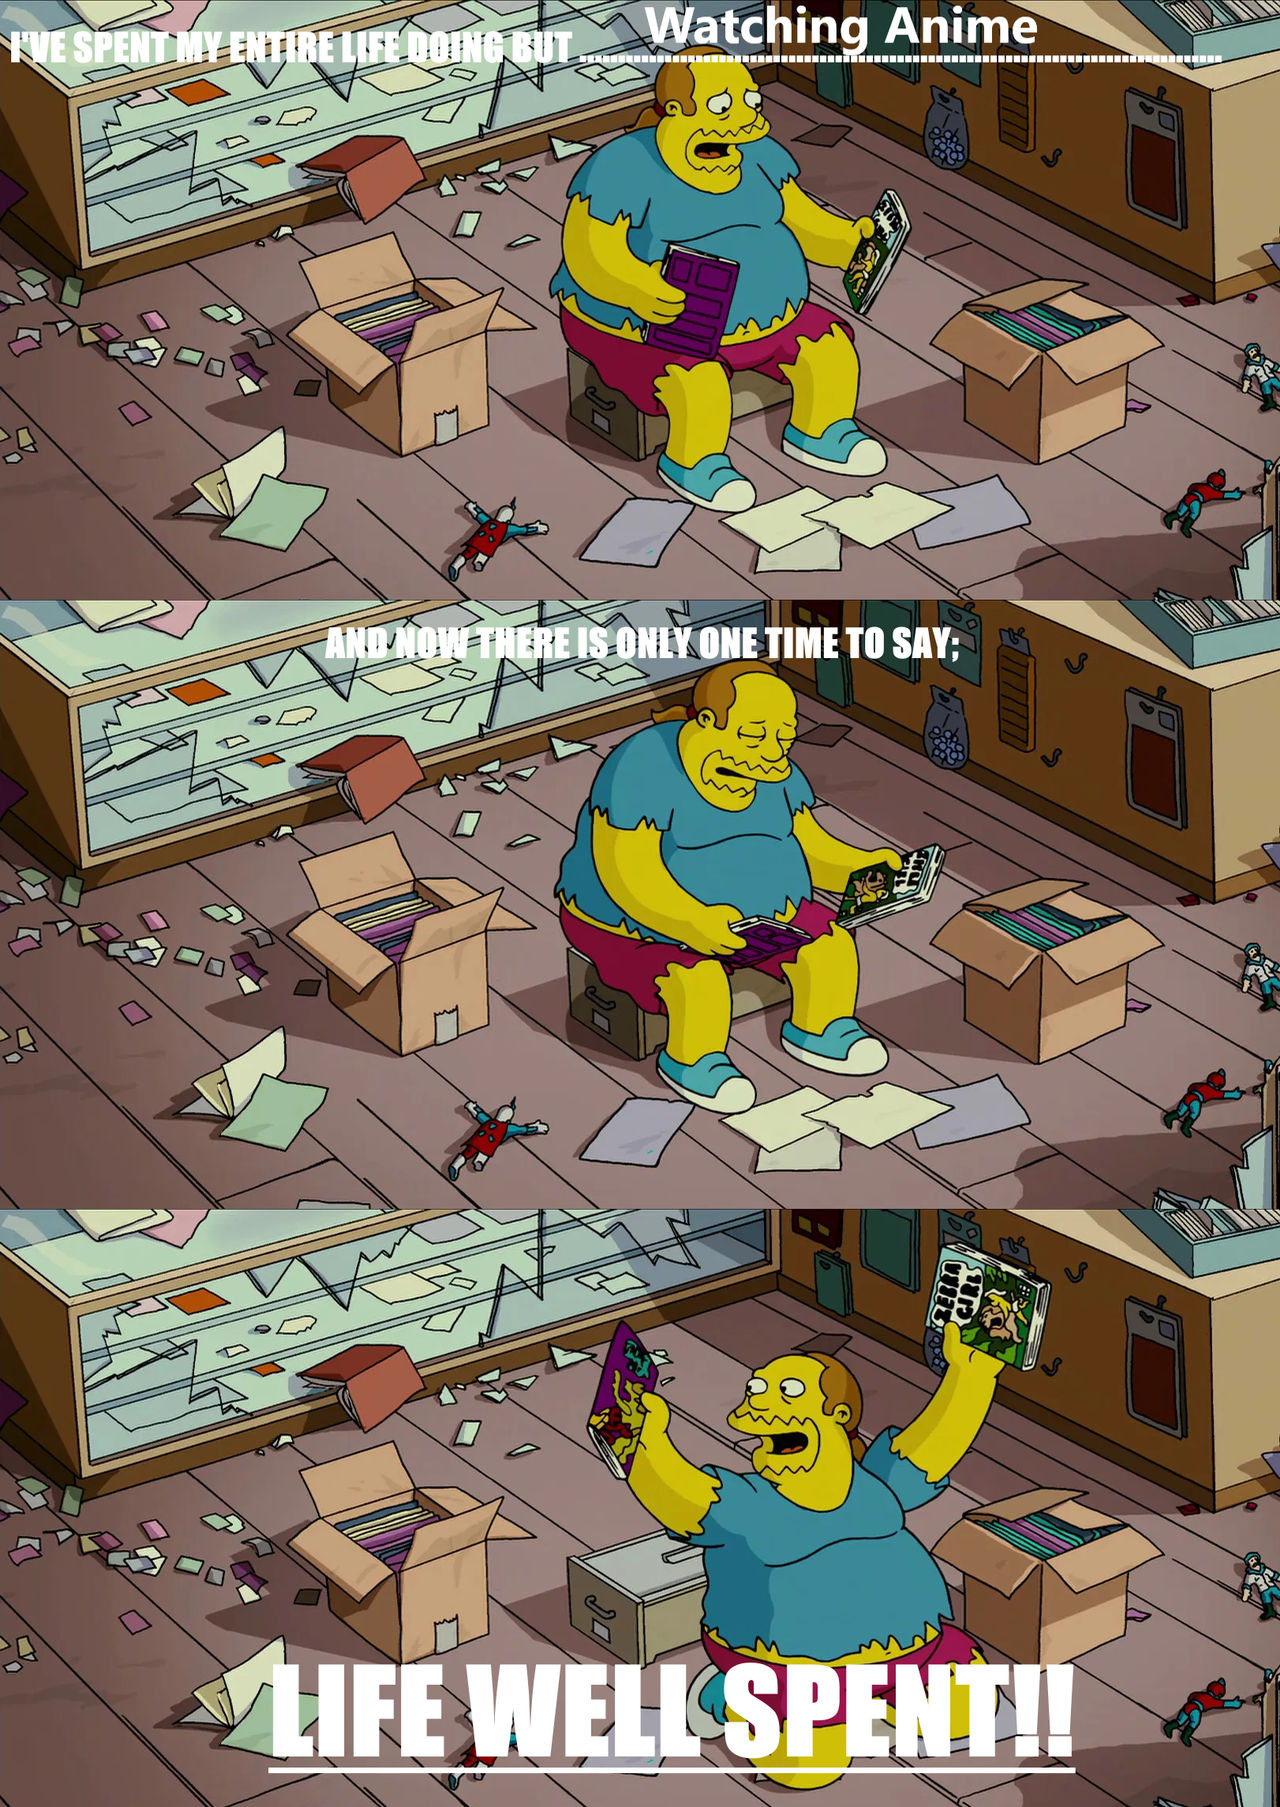 Comic Book Guy Watching Anime by Chrisarus12 on DeviantArt